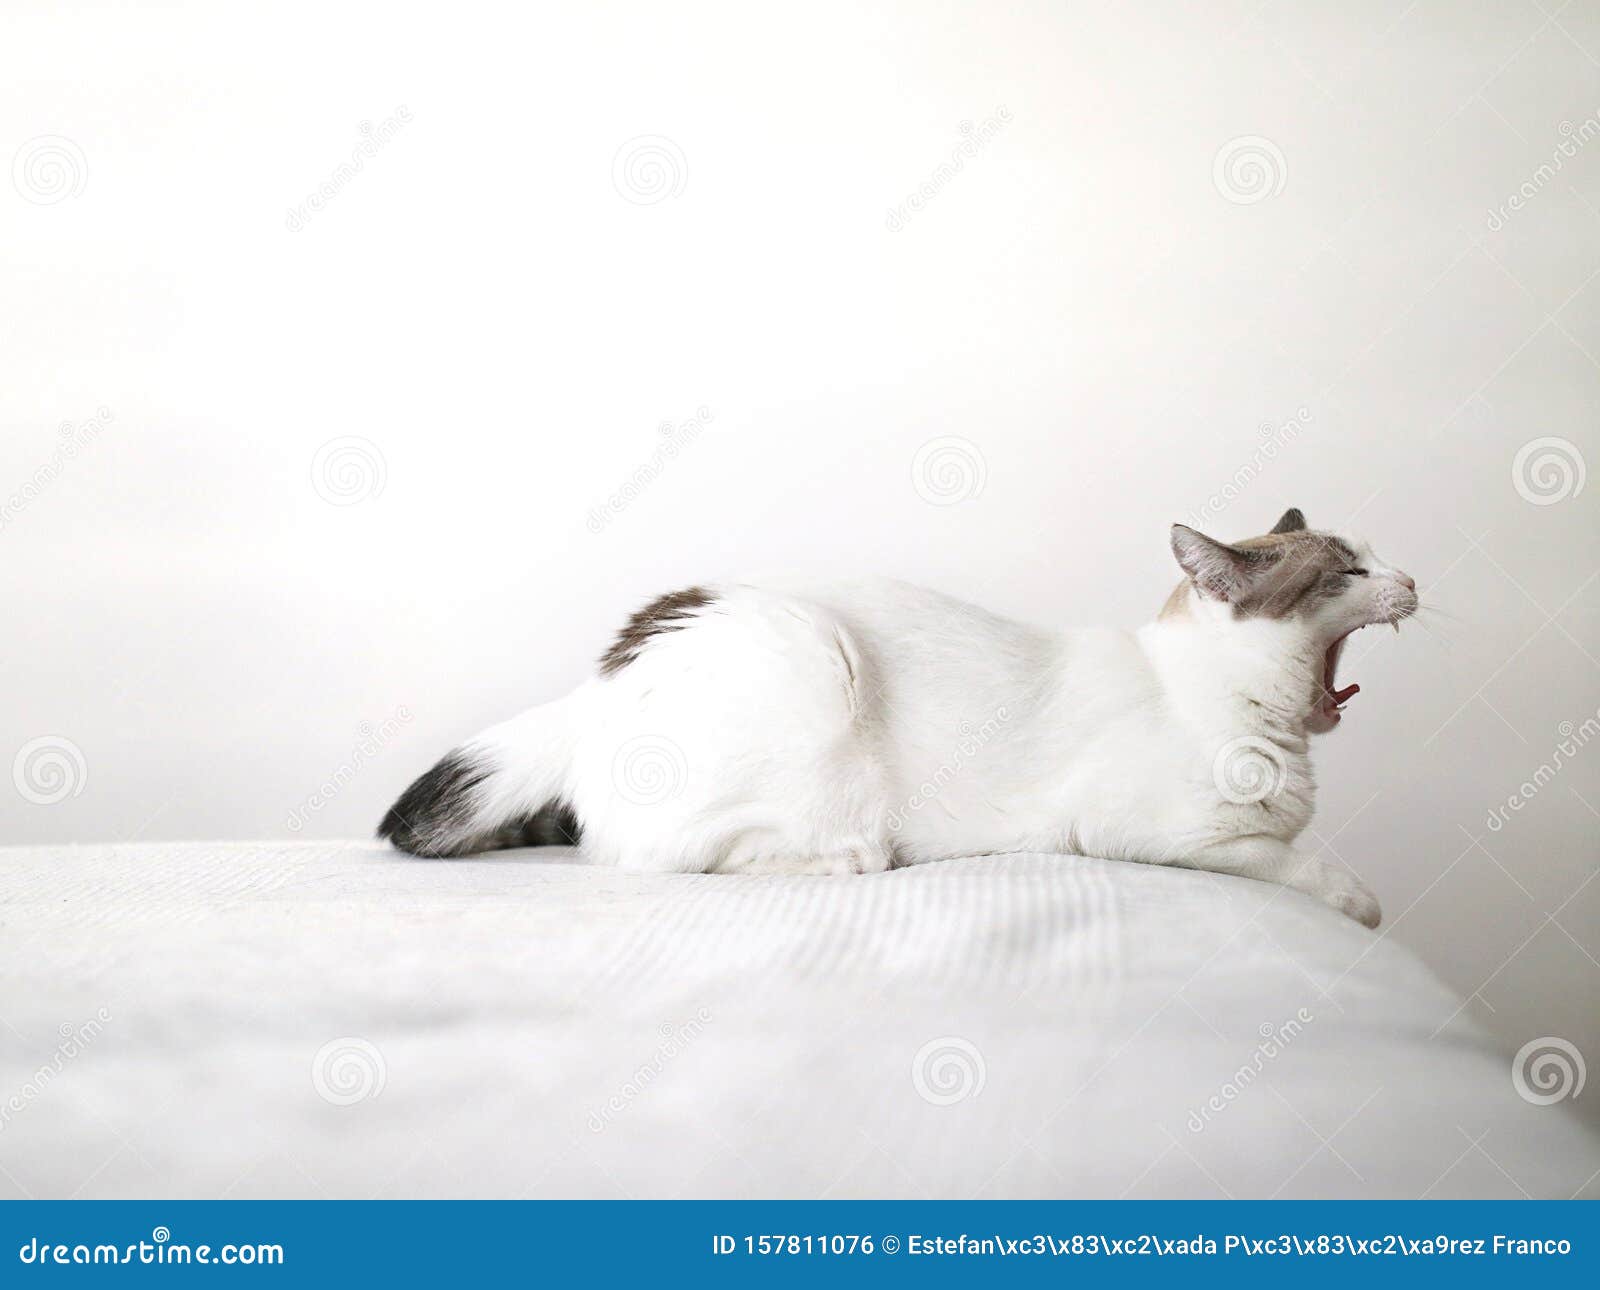 white tired cat yawning on a white bed